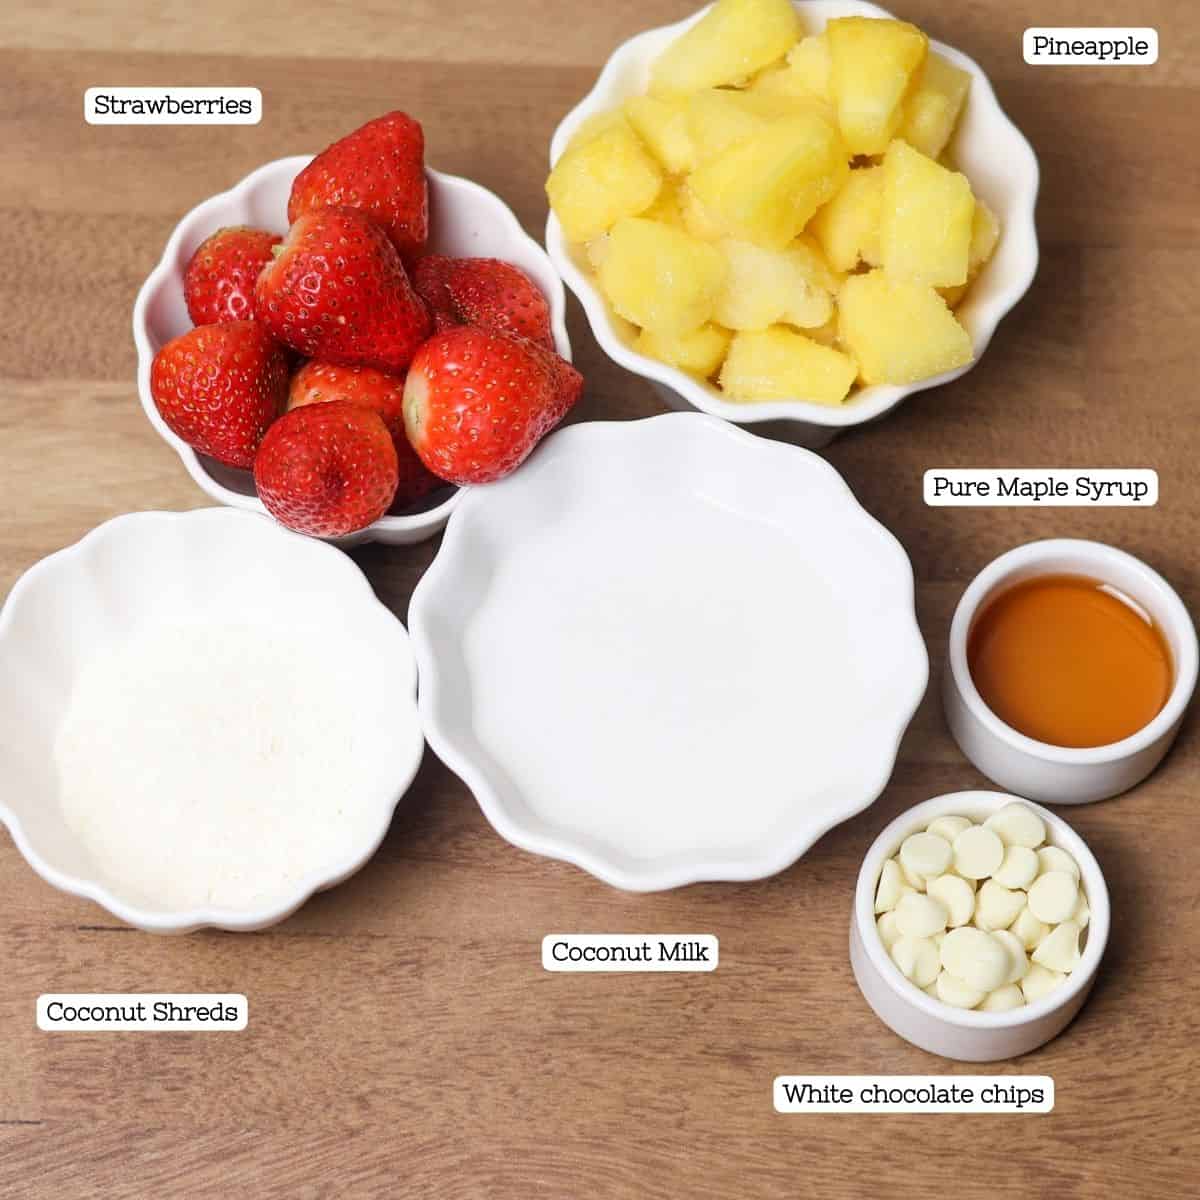 Neatly organized ingredients for a Bahama Mama smoothie, including bowls of strawberries, pineapple, white chocolate chips, shredded coconut, and maple syrup